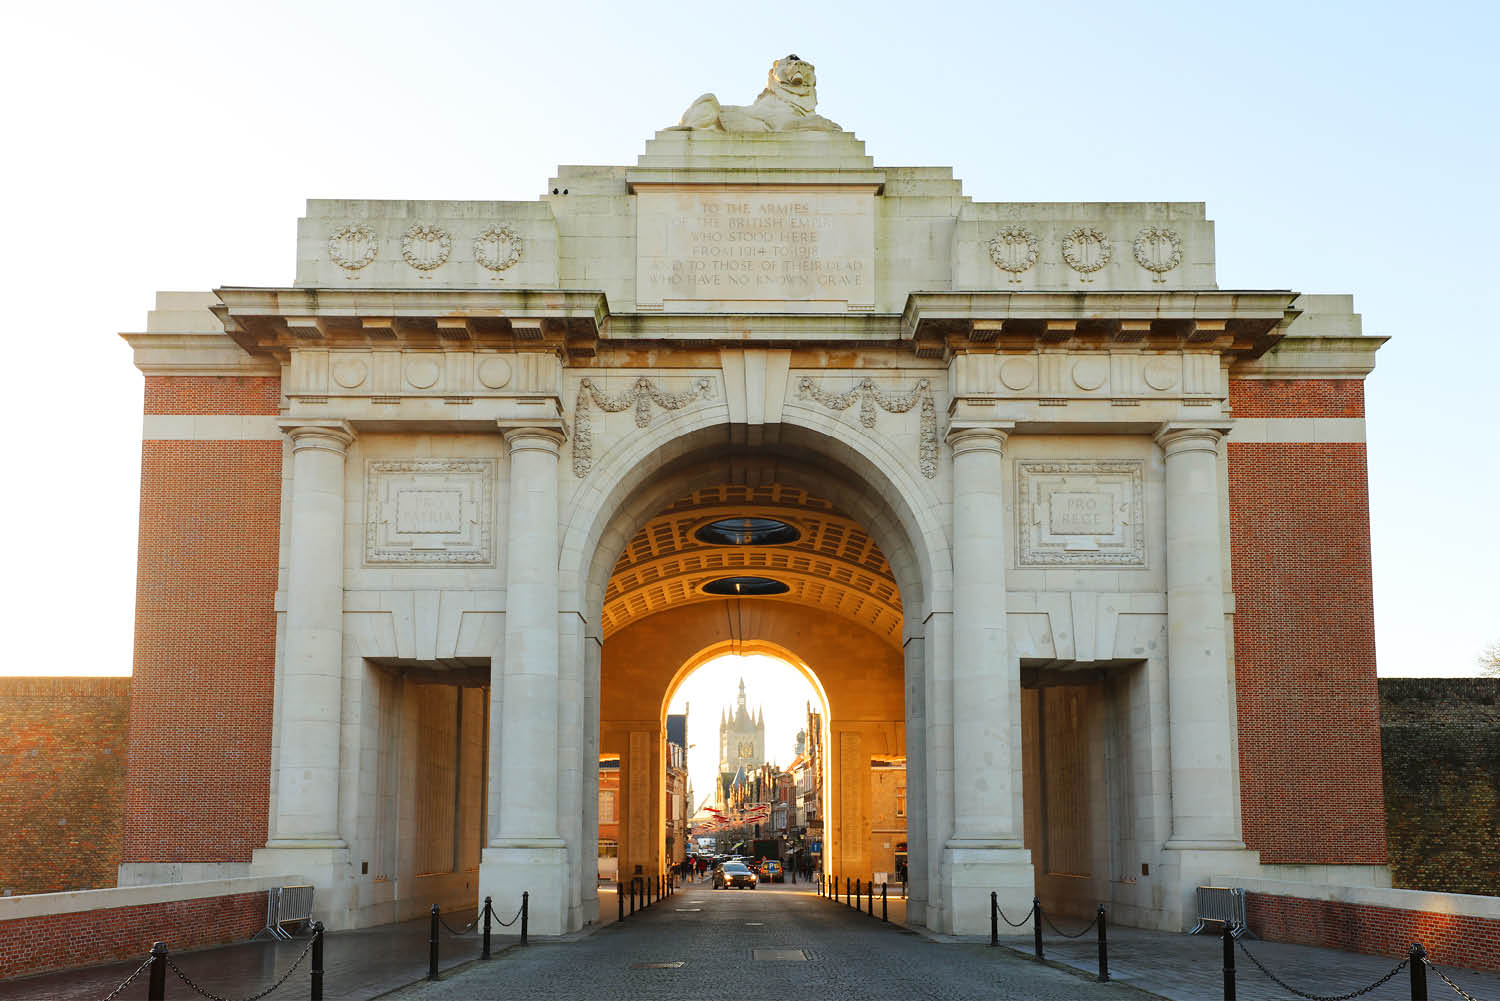 Menin Gate memorial to the missing soldiers of World War I in Ypres, Flanders Fields, Belgium